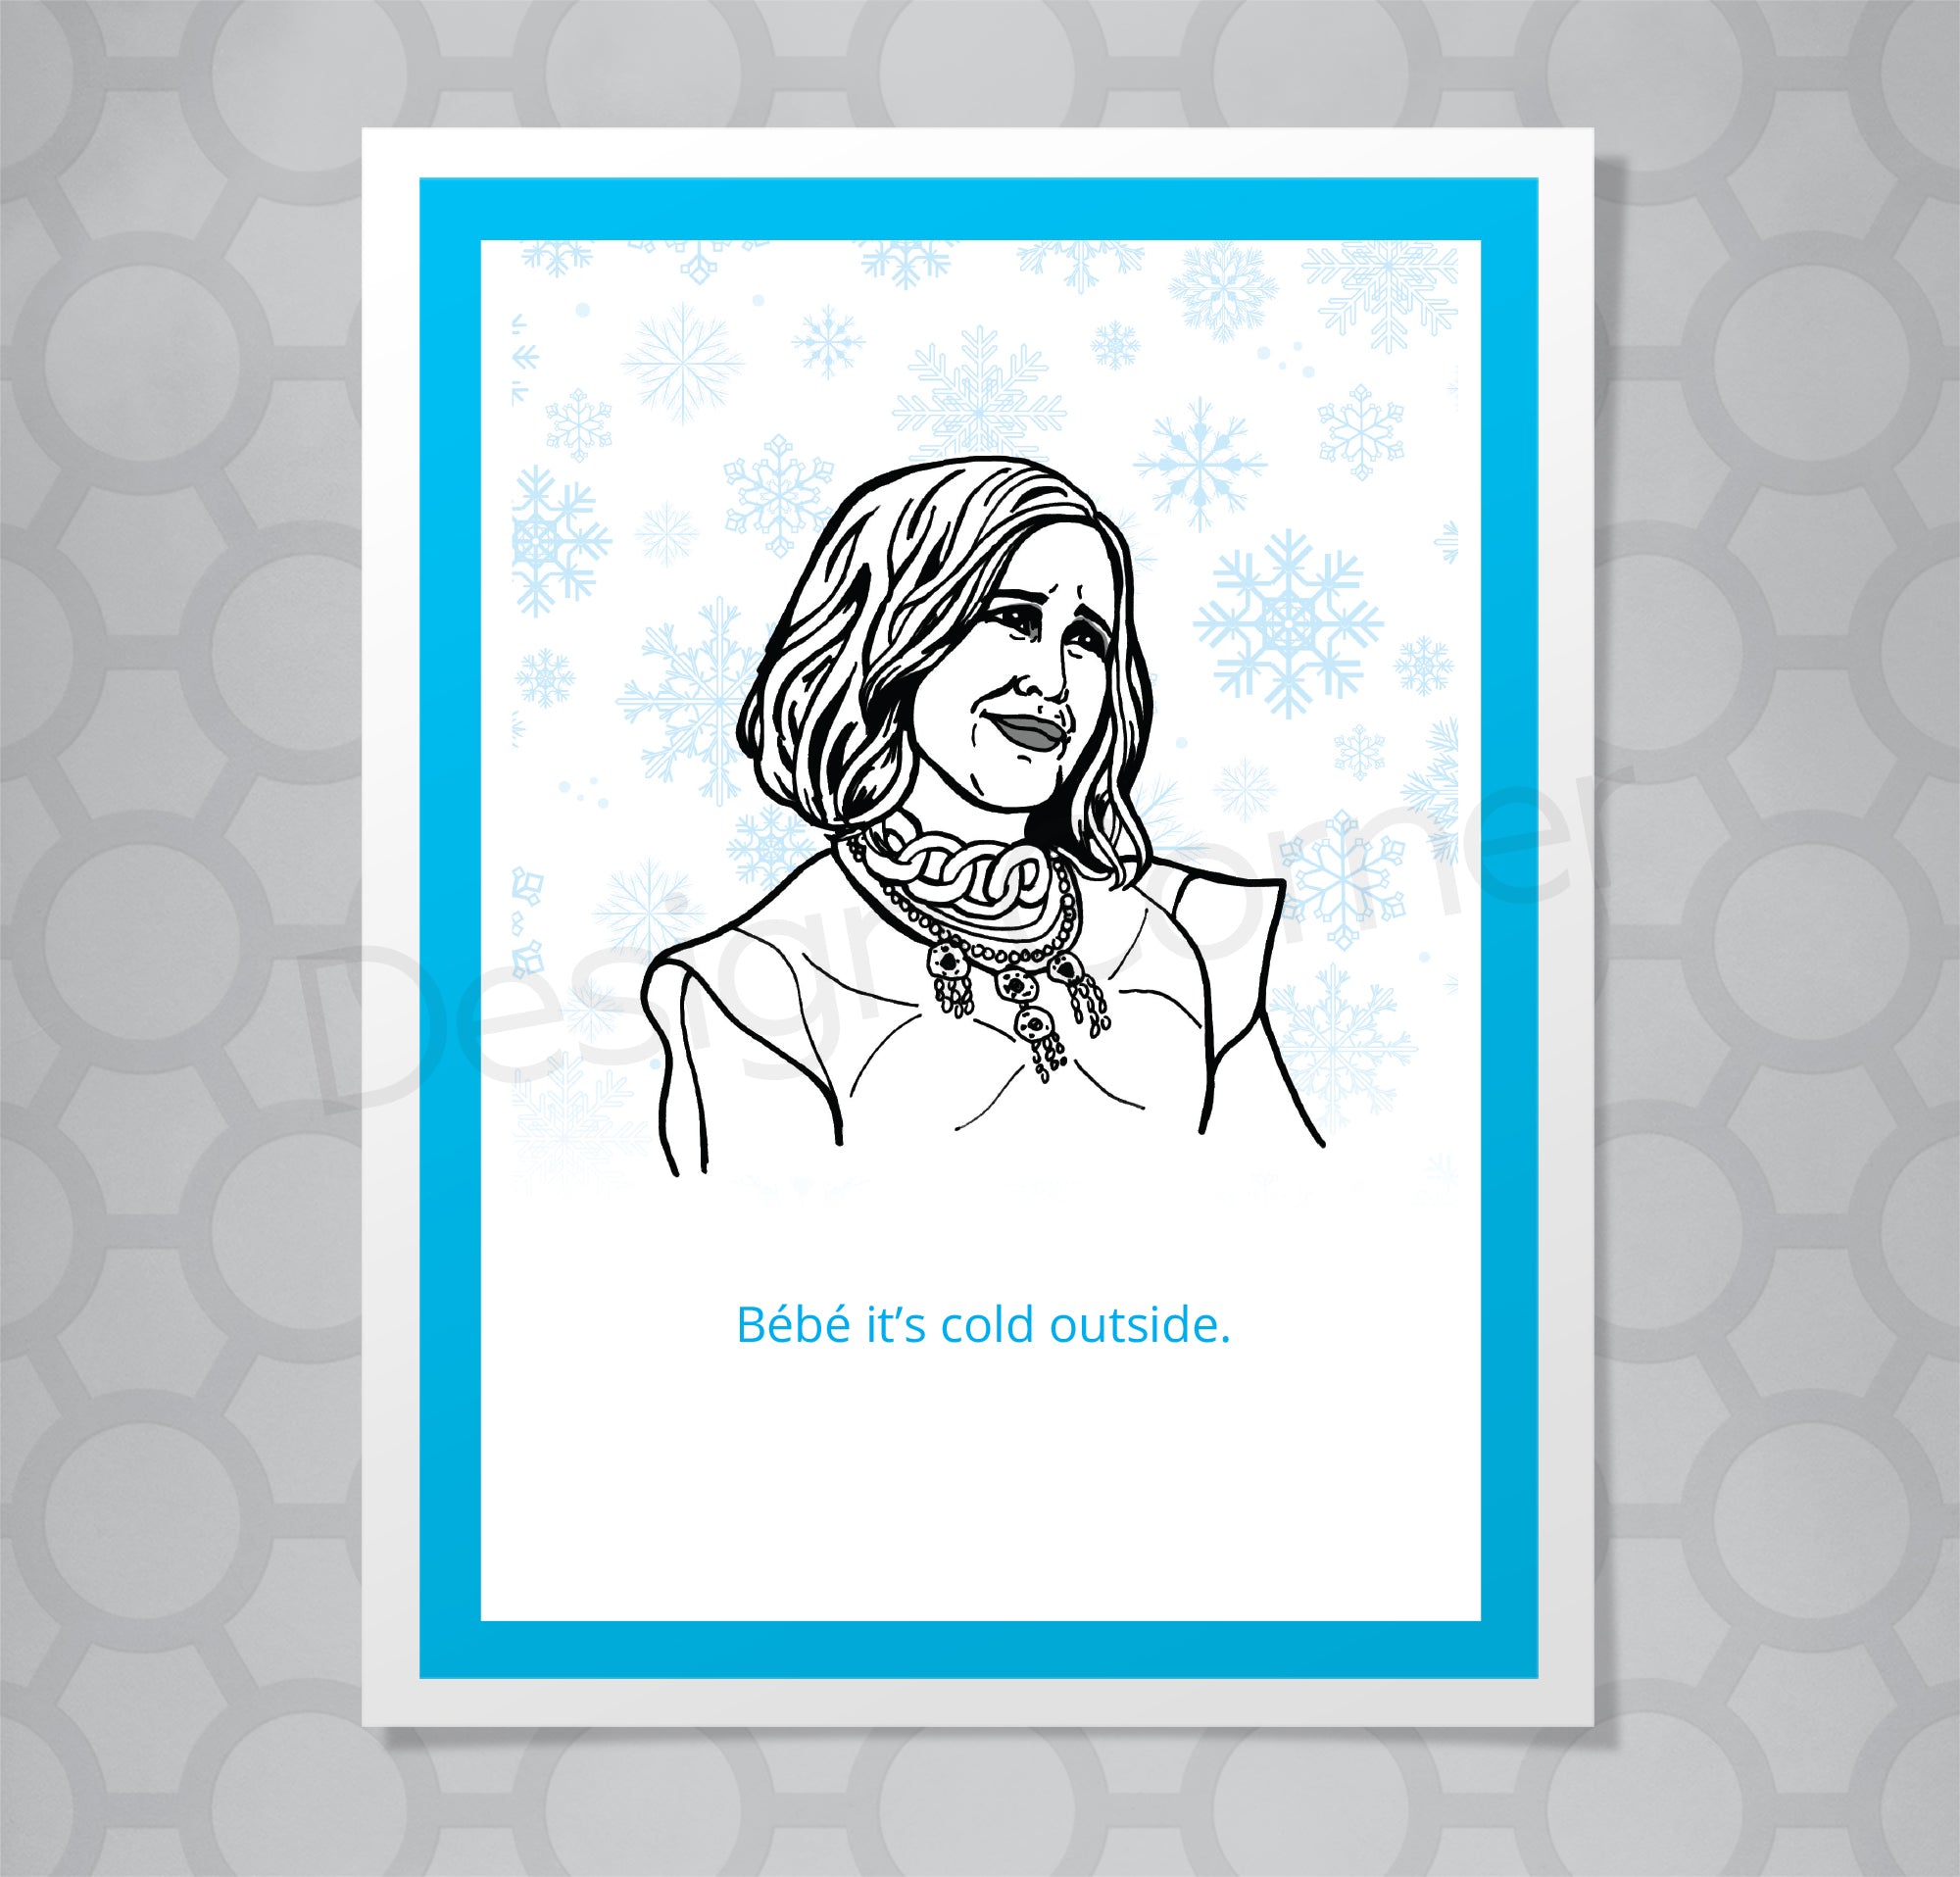 Illustration of Schitts Creek Moira rose on snowy background on Christmas card with caption Bebe it's cold outside.